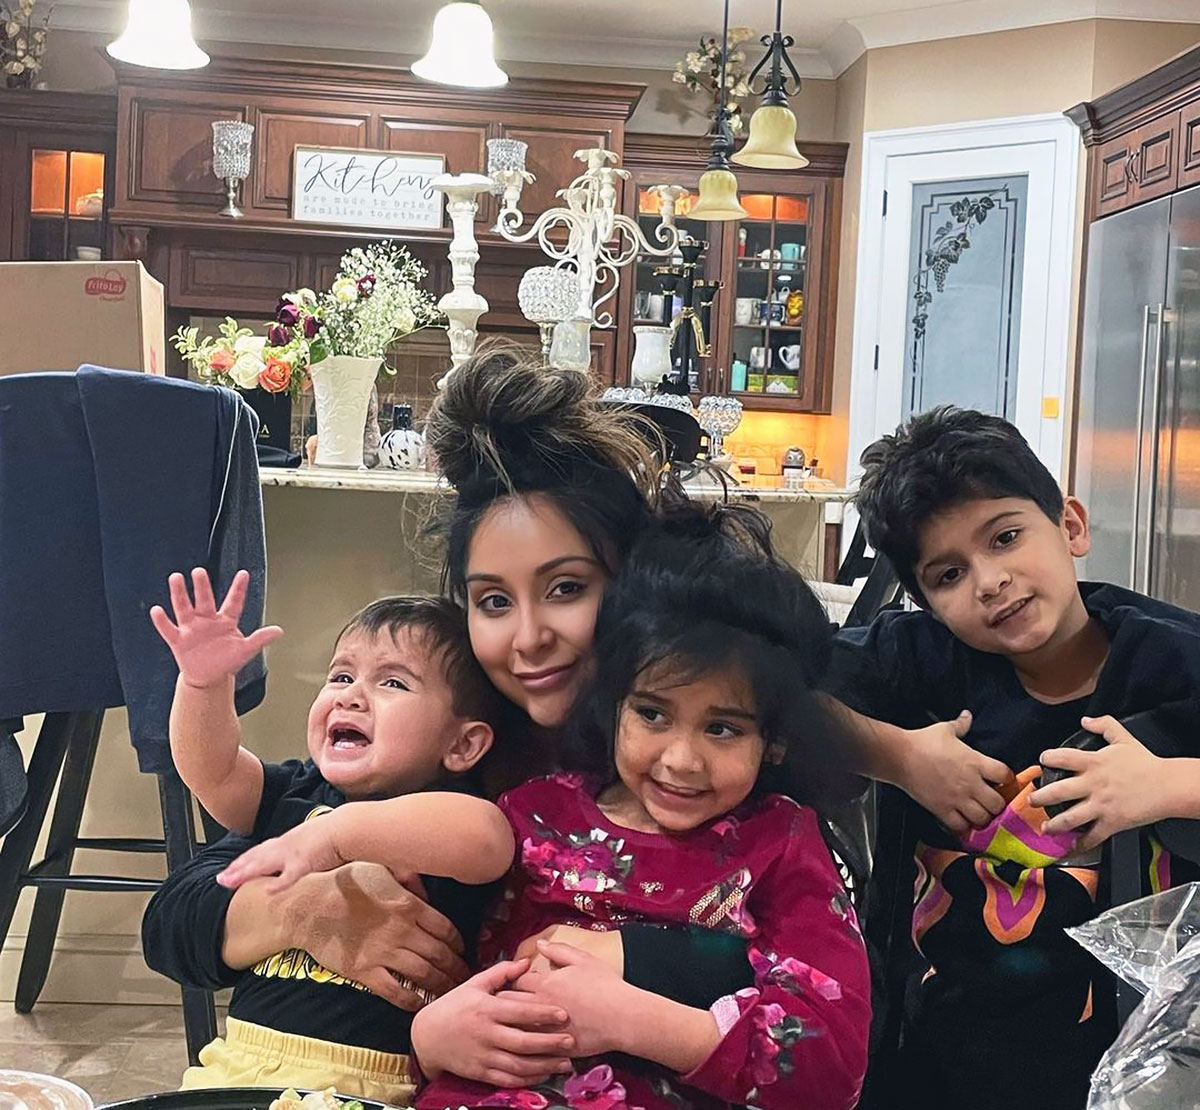 Nicole 'Snooki' Polizzi Says She 'Censors' Her Kids Watching 'Jersey Shore